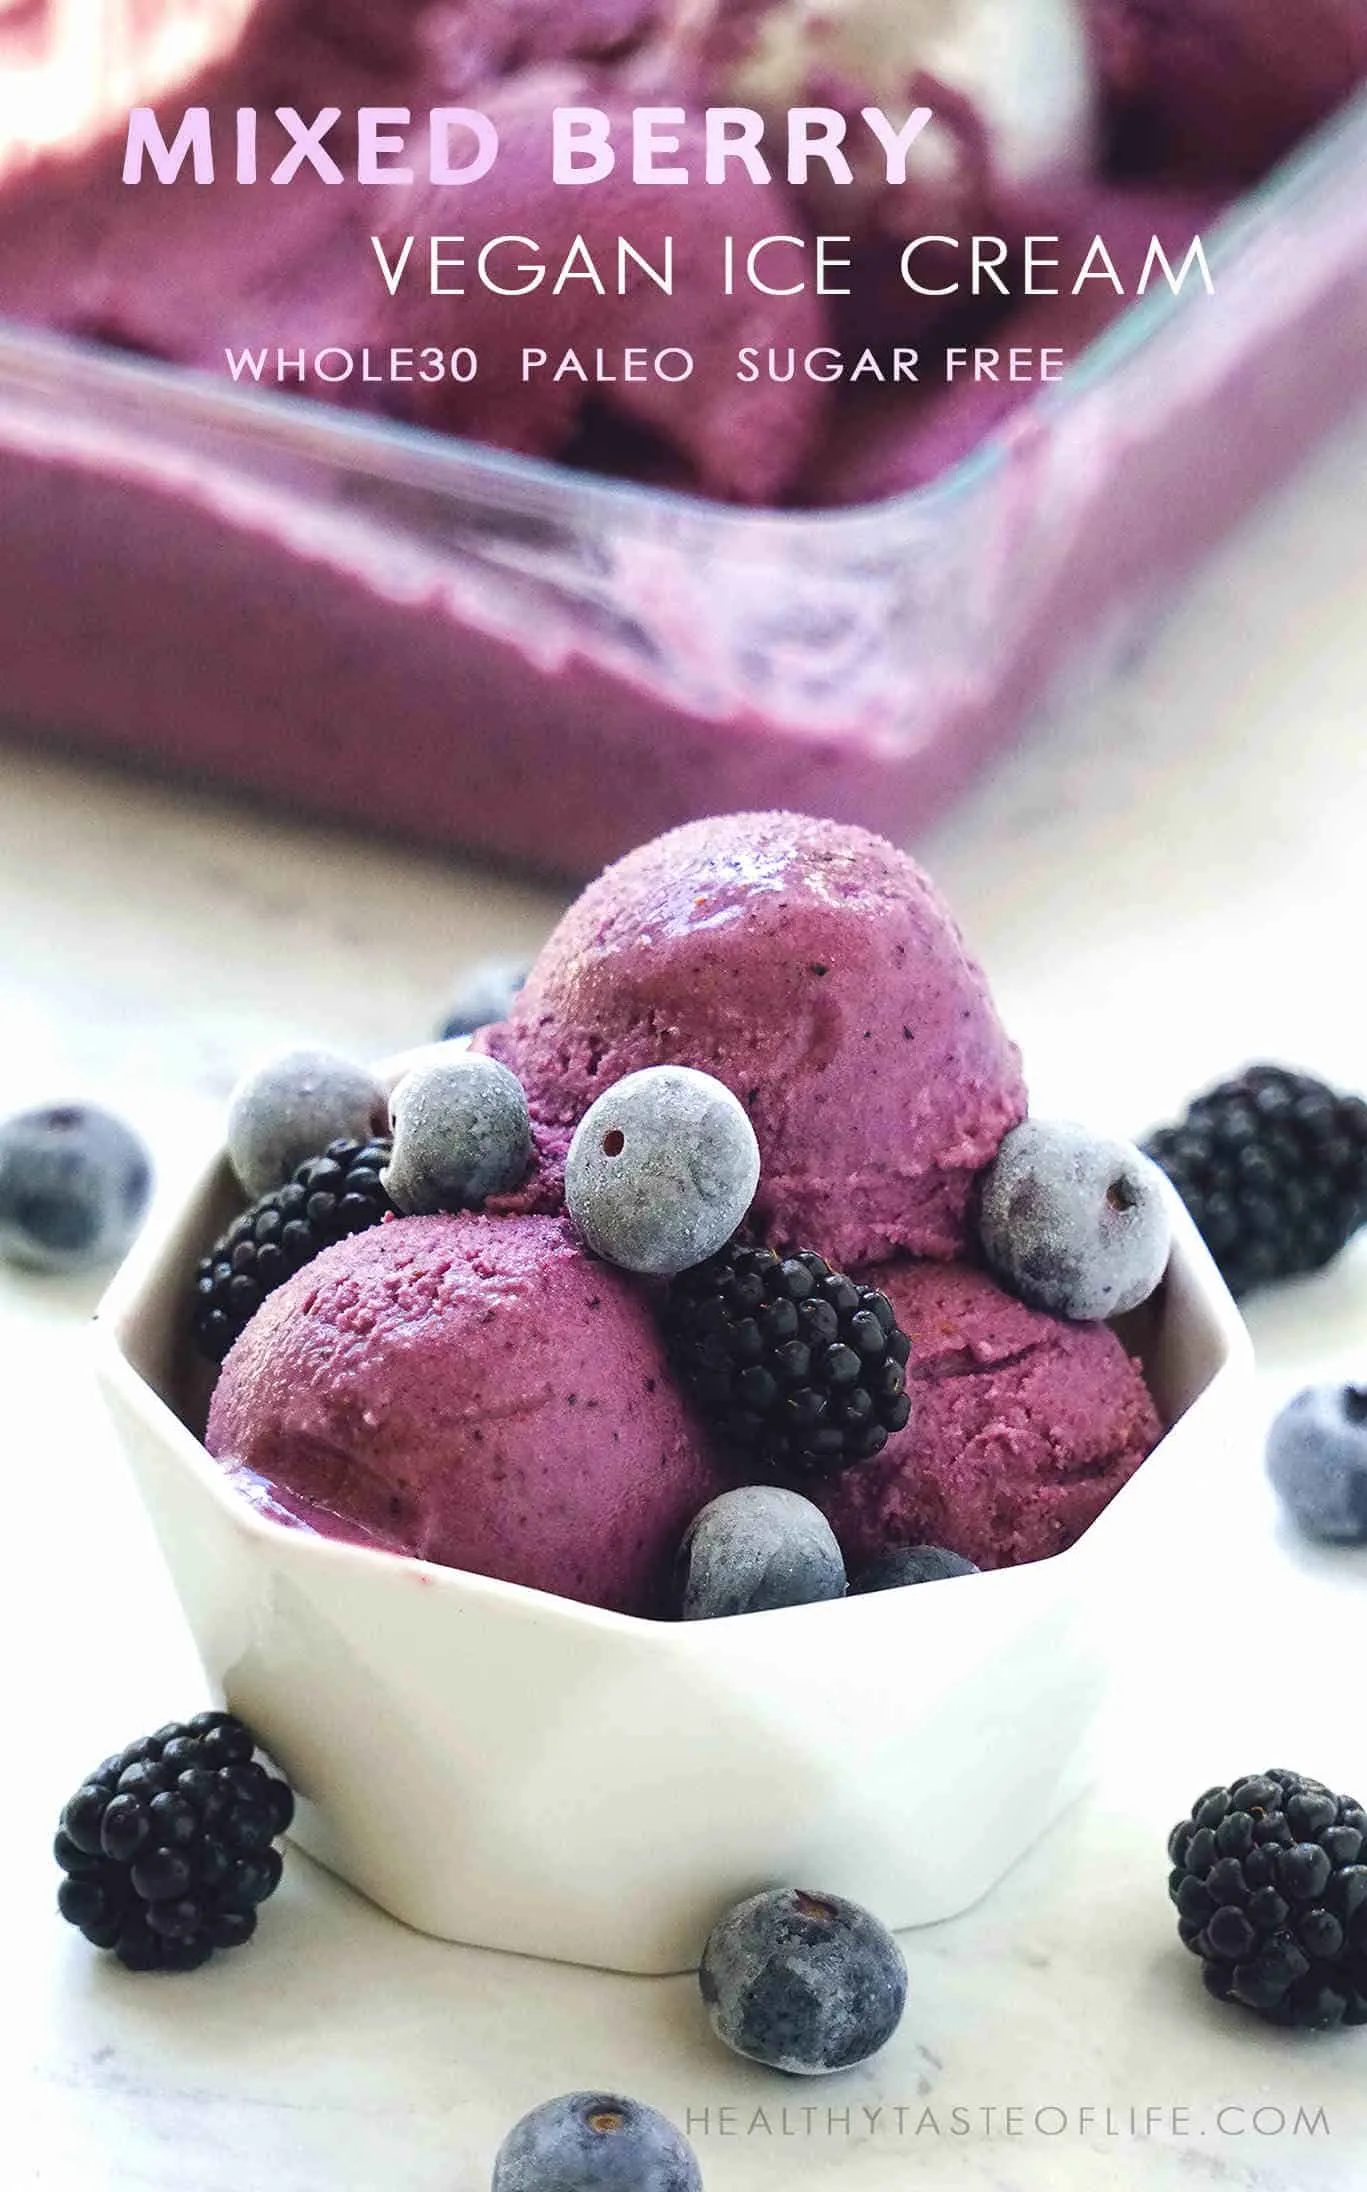 Healthy Dairy Free Mixed Berry Ice Cream (Blueberry, Blackberry, Strawberry) - Whole 30, Paleo, Vegan, Sugar Free, Gluten Free, Clean Eating No Dairy Summer Dessert With Coconut Cream, dates and berries).